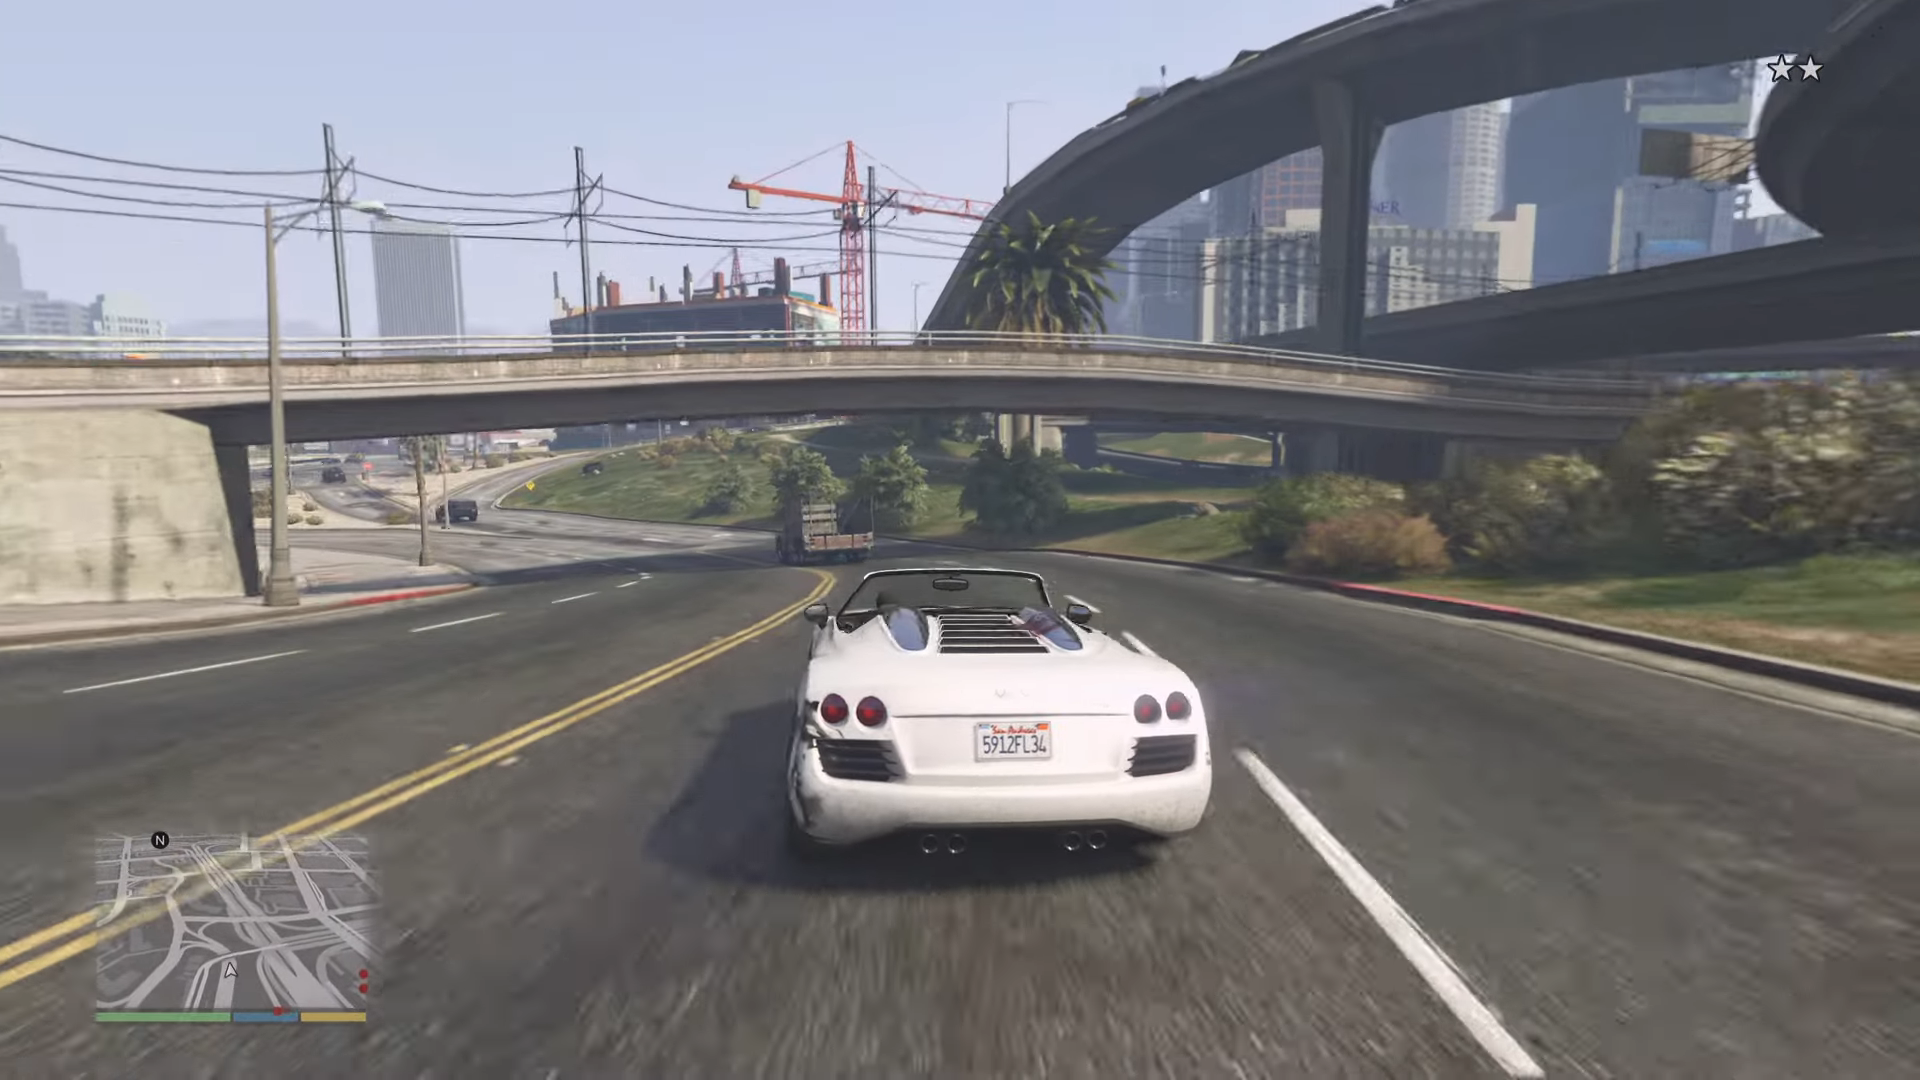 Media asset in full size related to 3dfxzone.it news item entitled as follows: Primi 30 minuti di gameplay tratti da GTA V su PlayStation 5 con ray tracing | Image Name: news33085_GTA-V_PS5_Fidelity-Mode_Screenshot_1.png